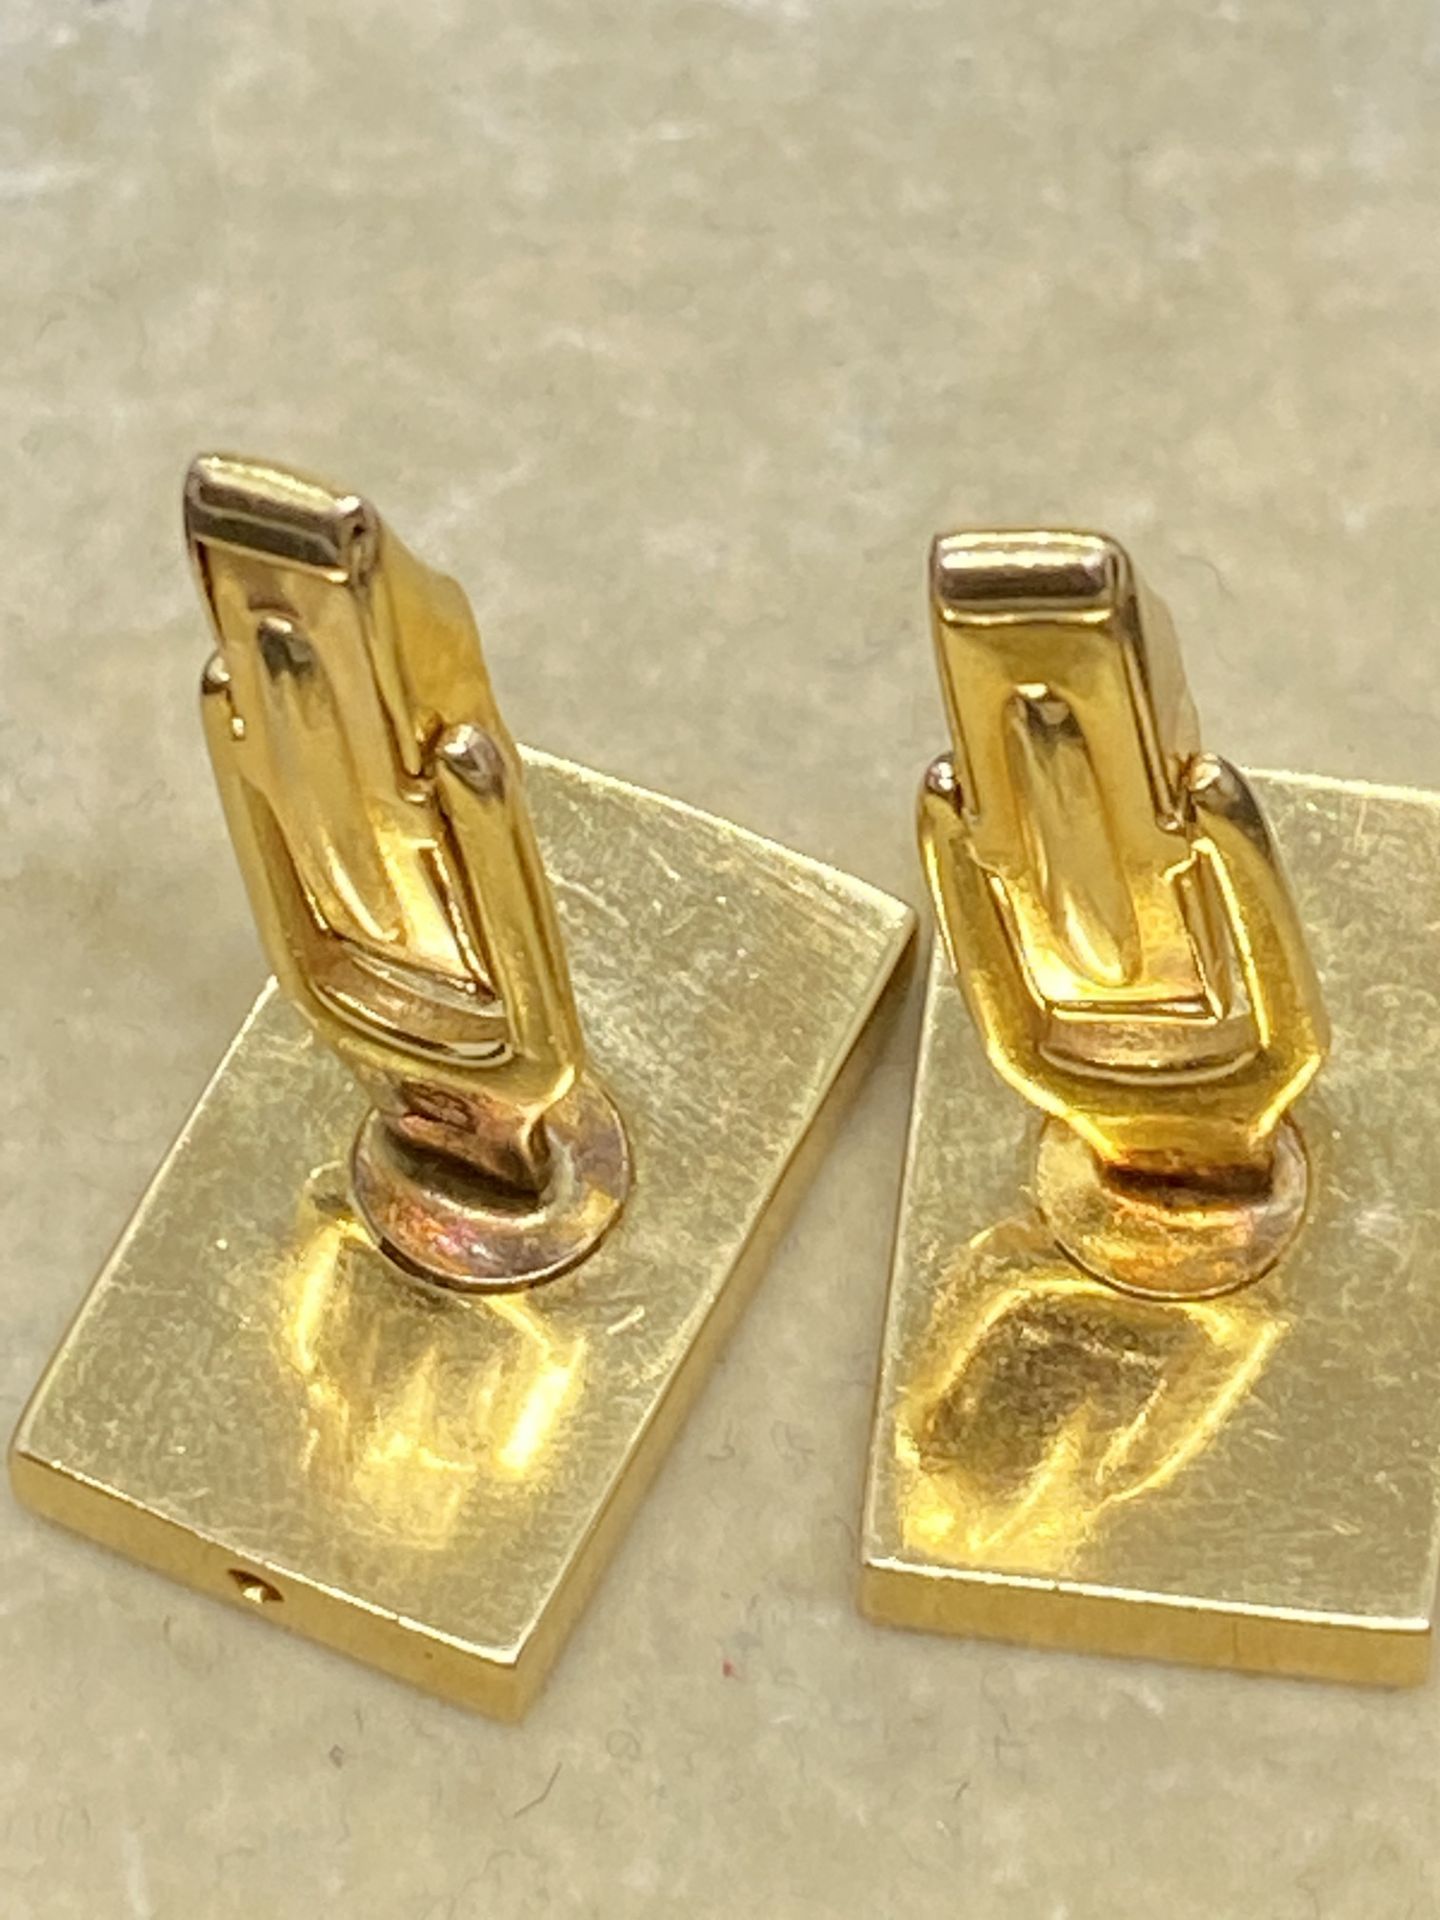 LETTER D YELLOW METAL CUFFLINKS TESTED AS AT LEAST 9ct GOLD 17.5 GRAMS - Image 3 of 4